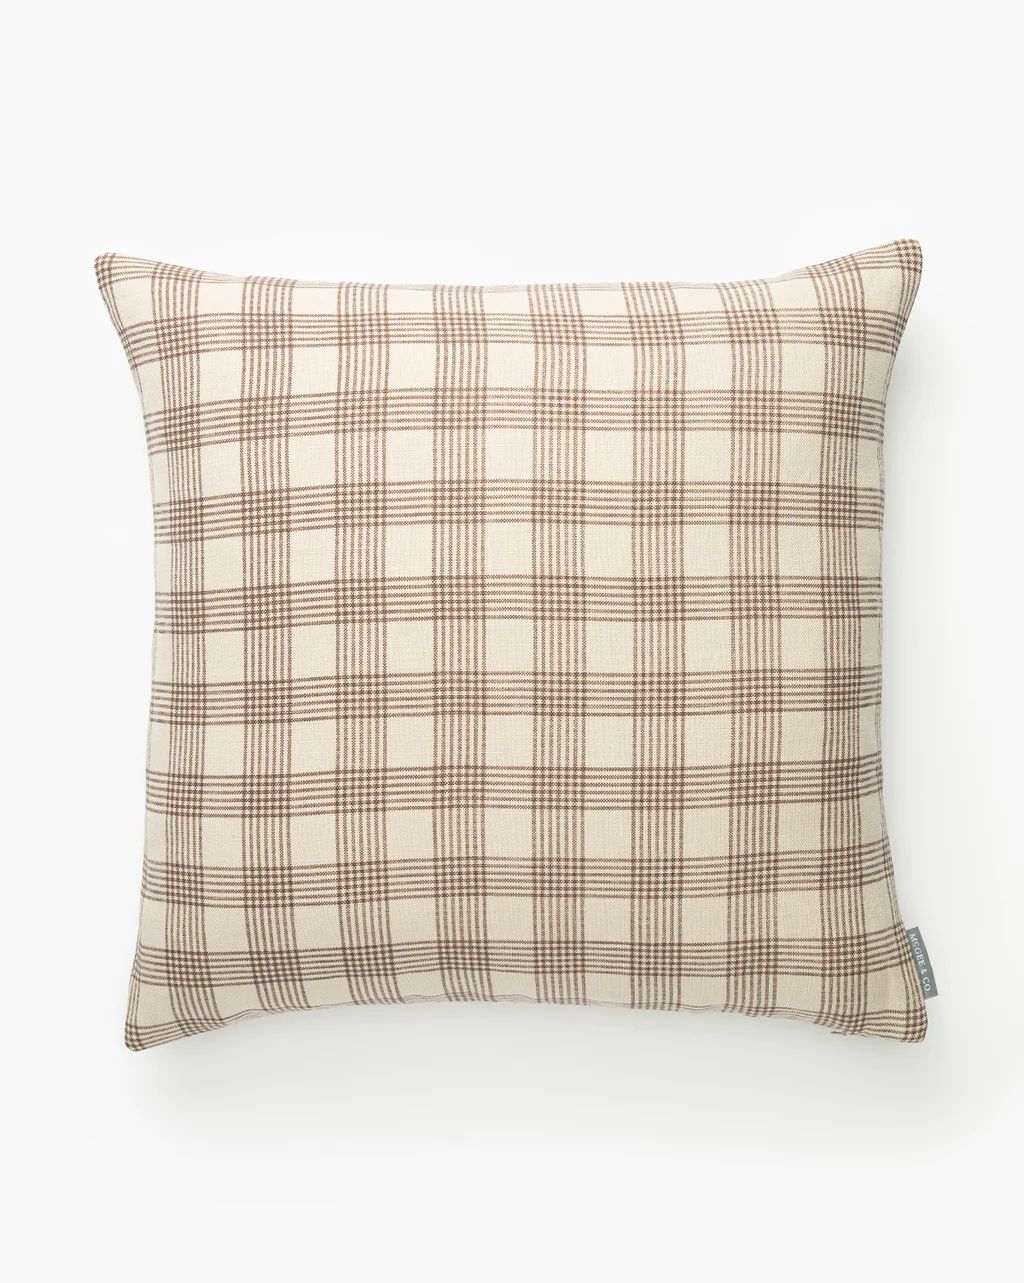 Glendale Pillow Cover | McGee & Co.